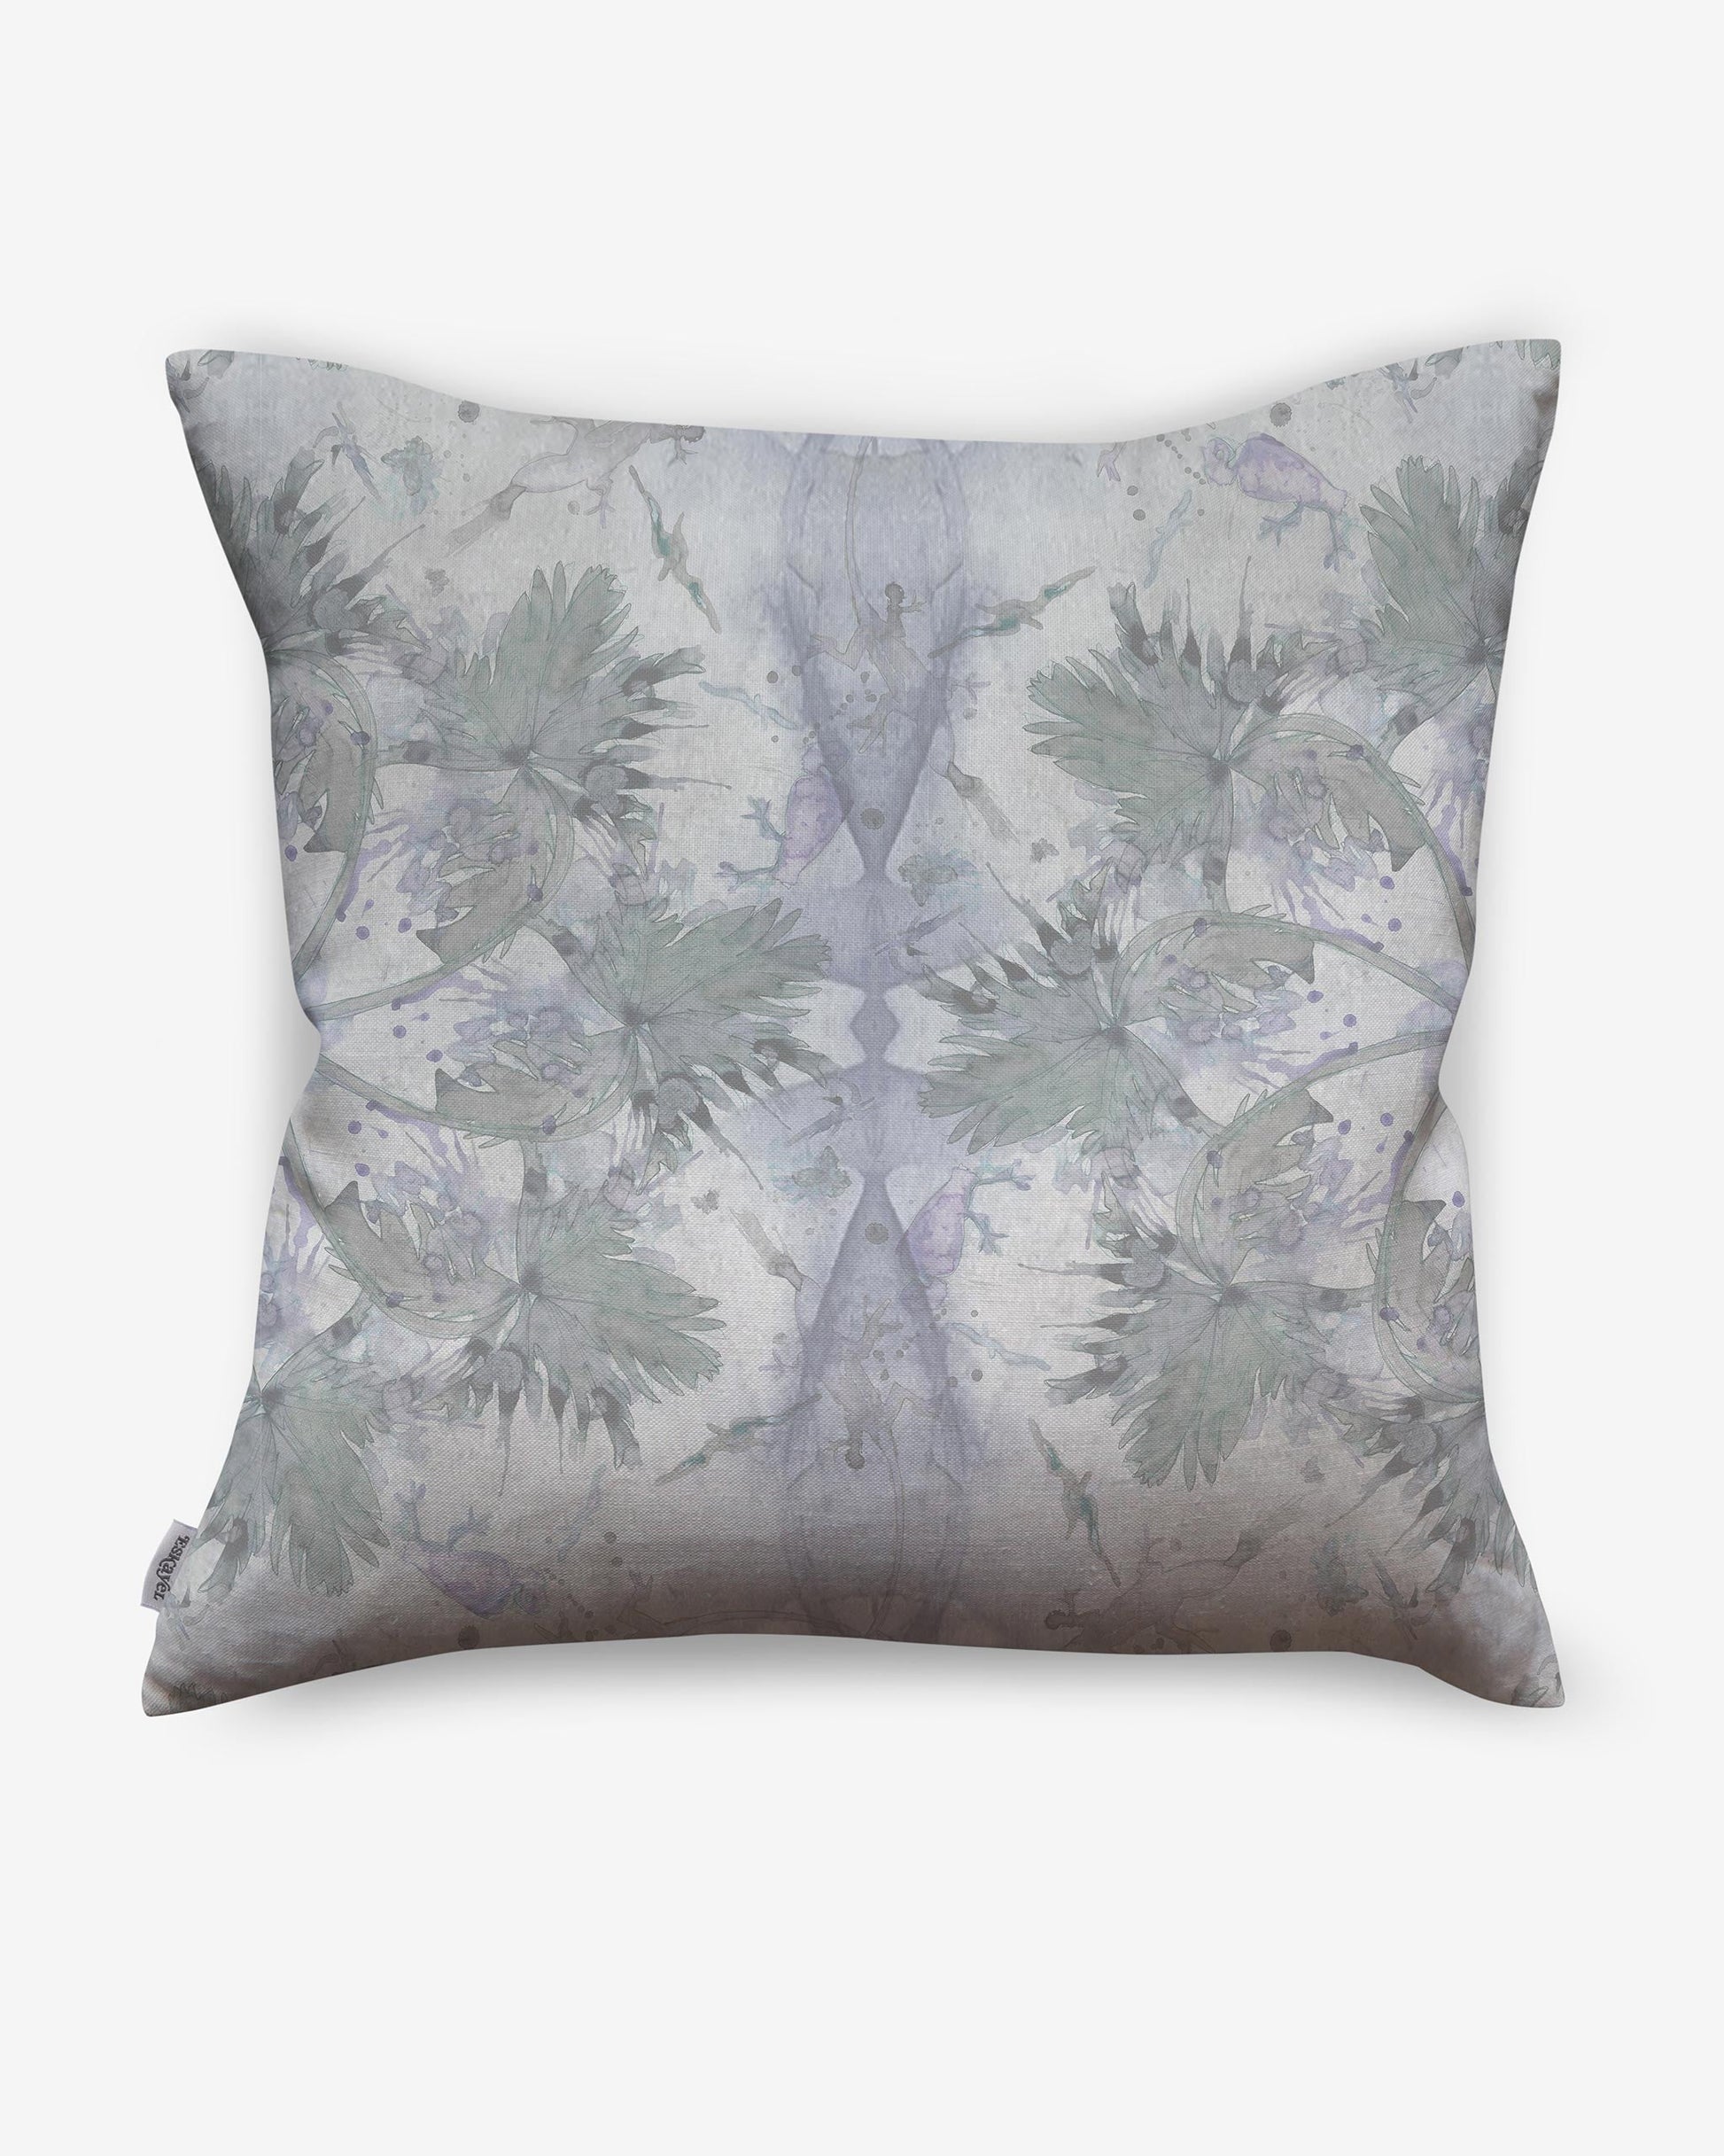 A Laurel Forest Pillow with a purple and white floral pattern